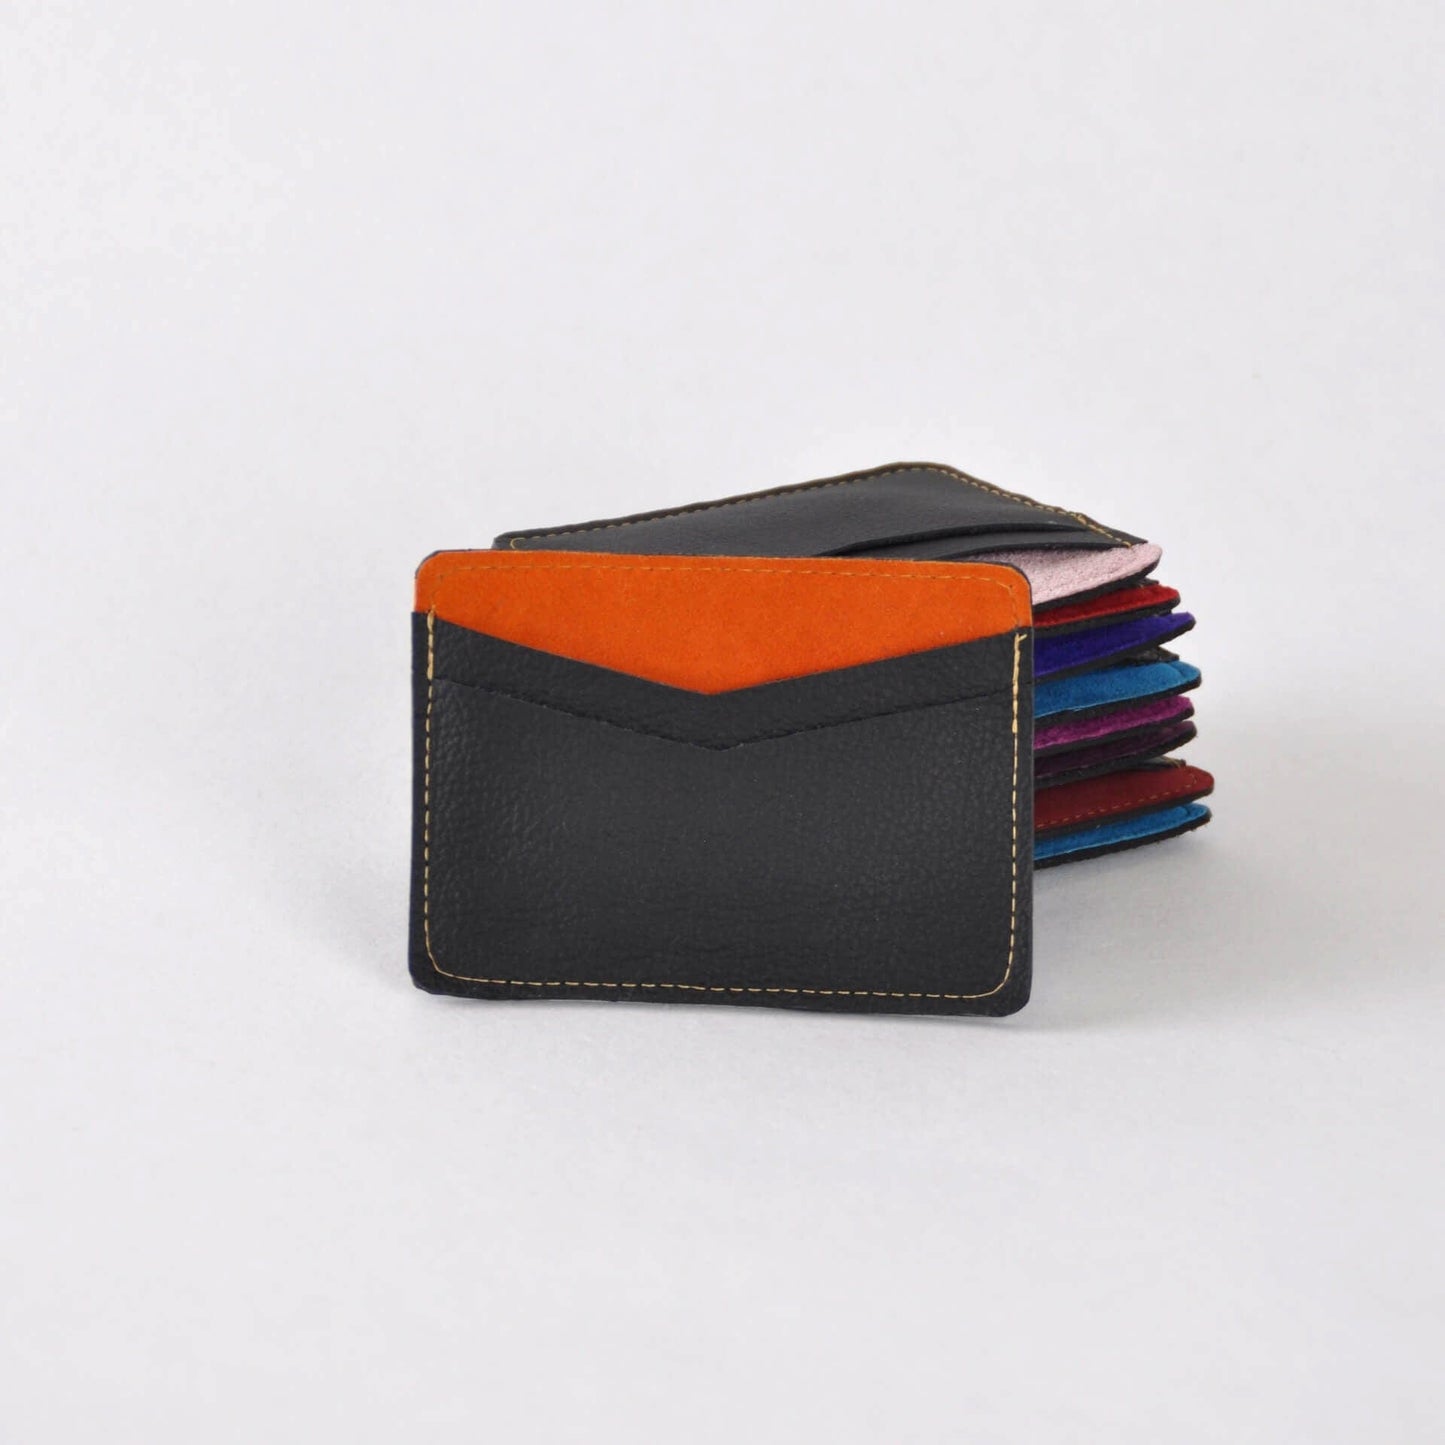 Zoe Dunn Designs Purse / Wallet Black / Orange Card Holder - Recycled Leather